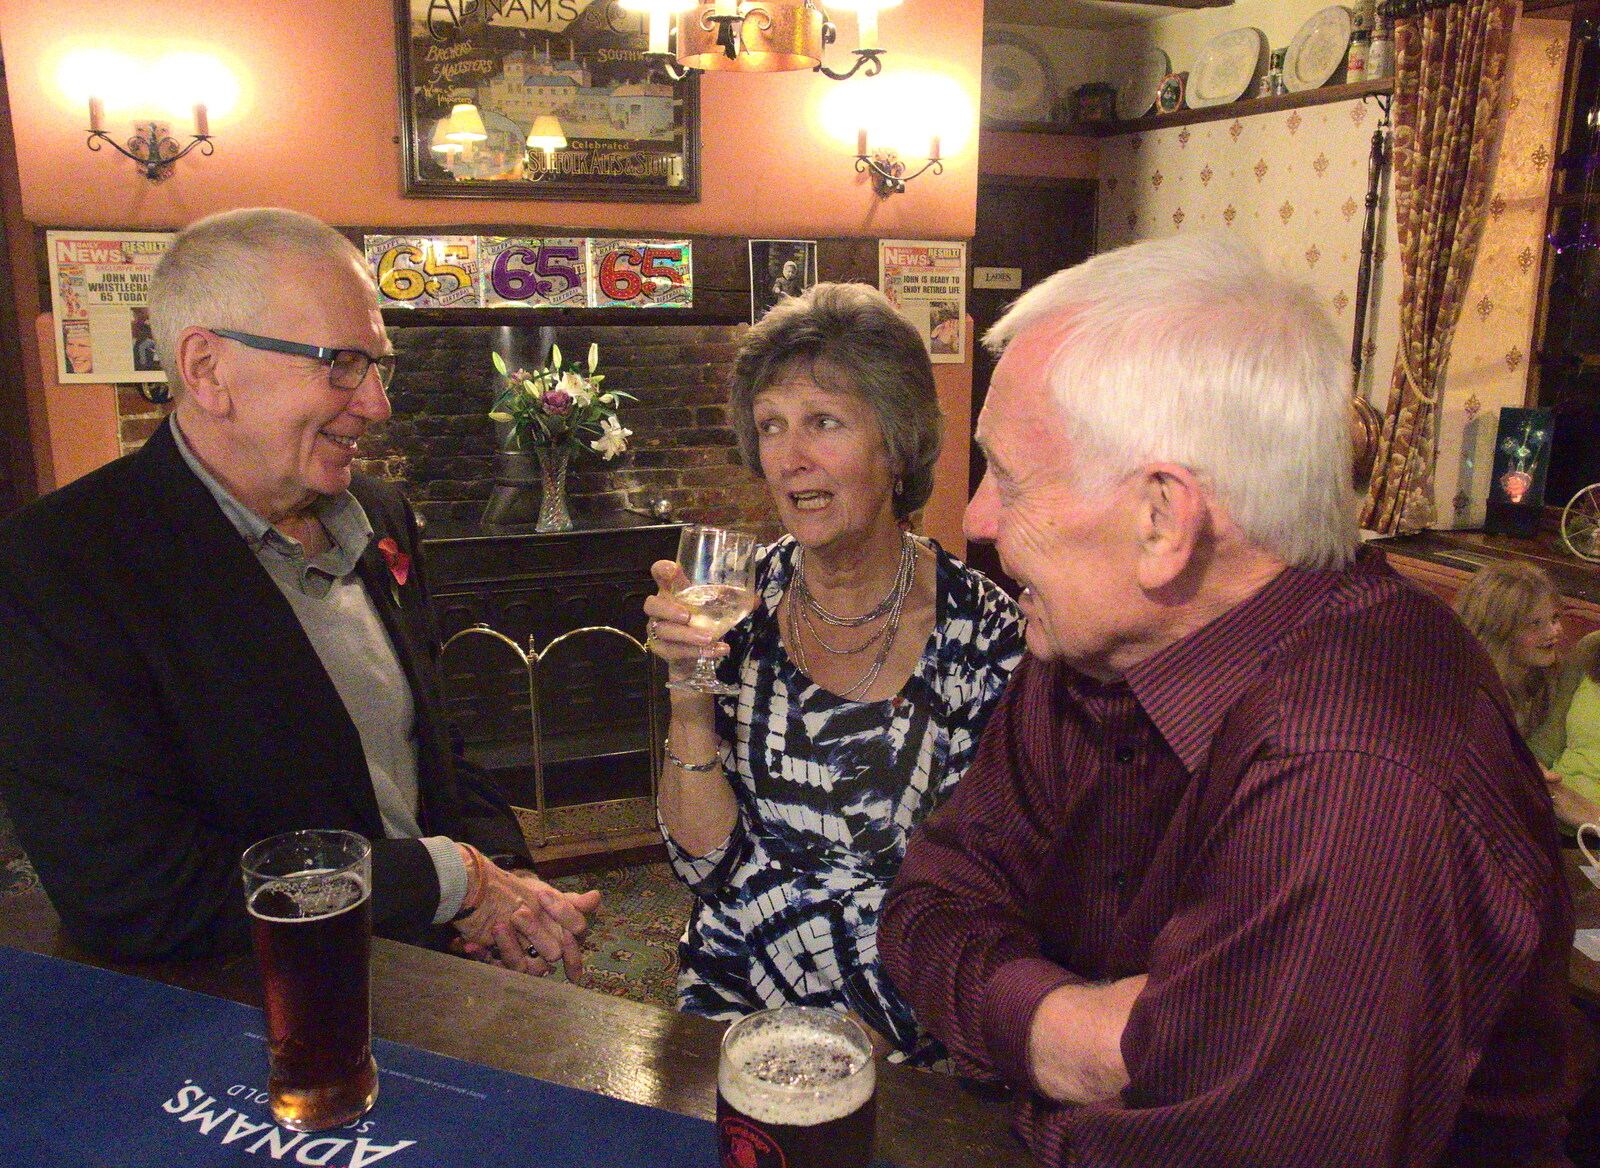 John Willy with Jill and Colin from John Willy's 65th and Other Stories, The Swan, Brome, Suffolk - 31st October 2015